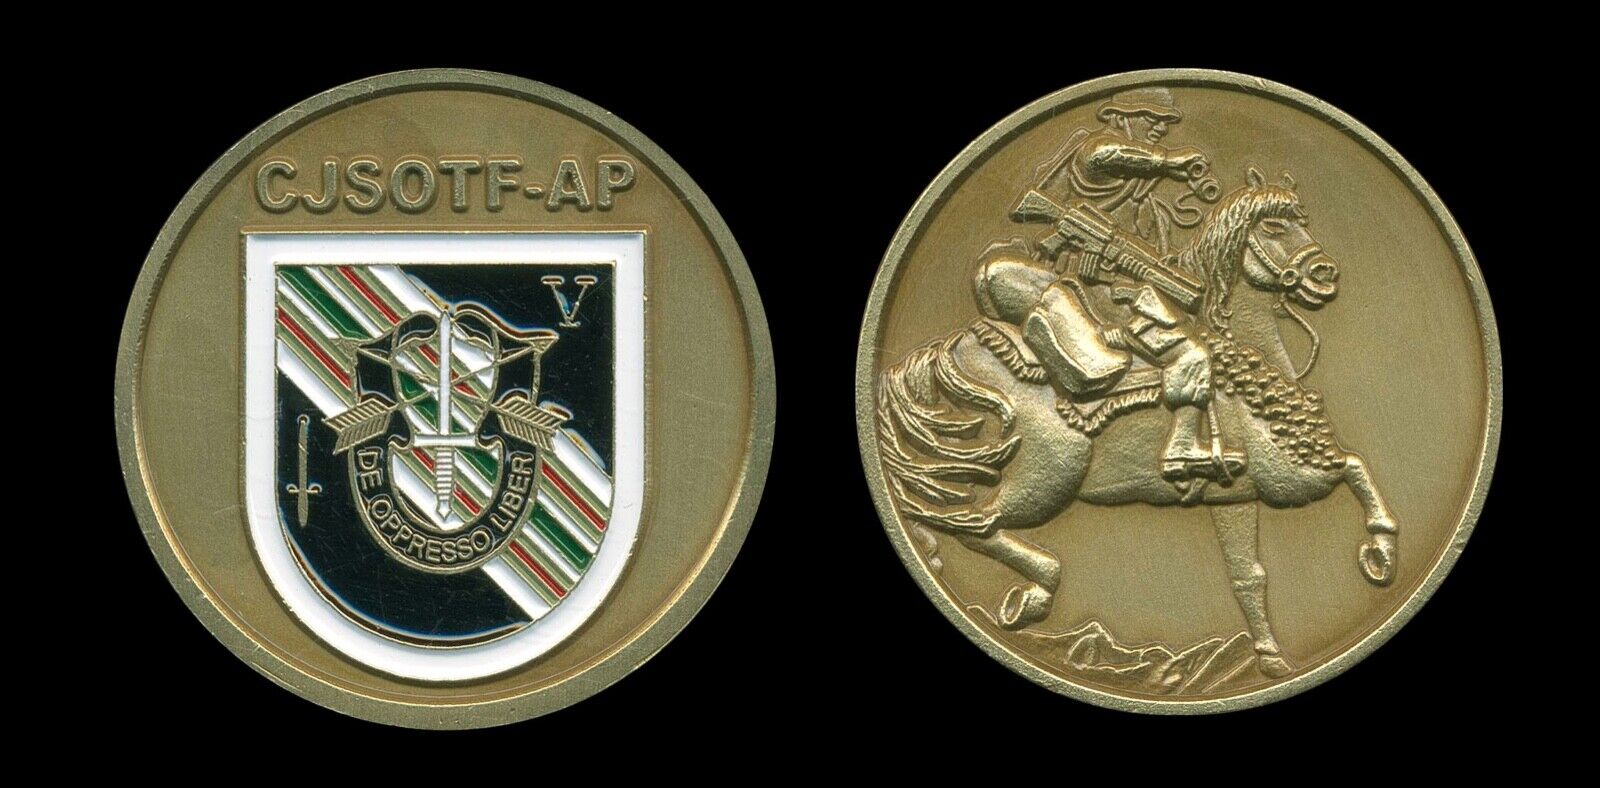 Challenge Coin - US Army Special Forces Arabian Peninsula CJSOTF-AP